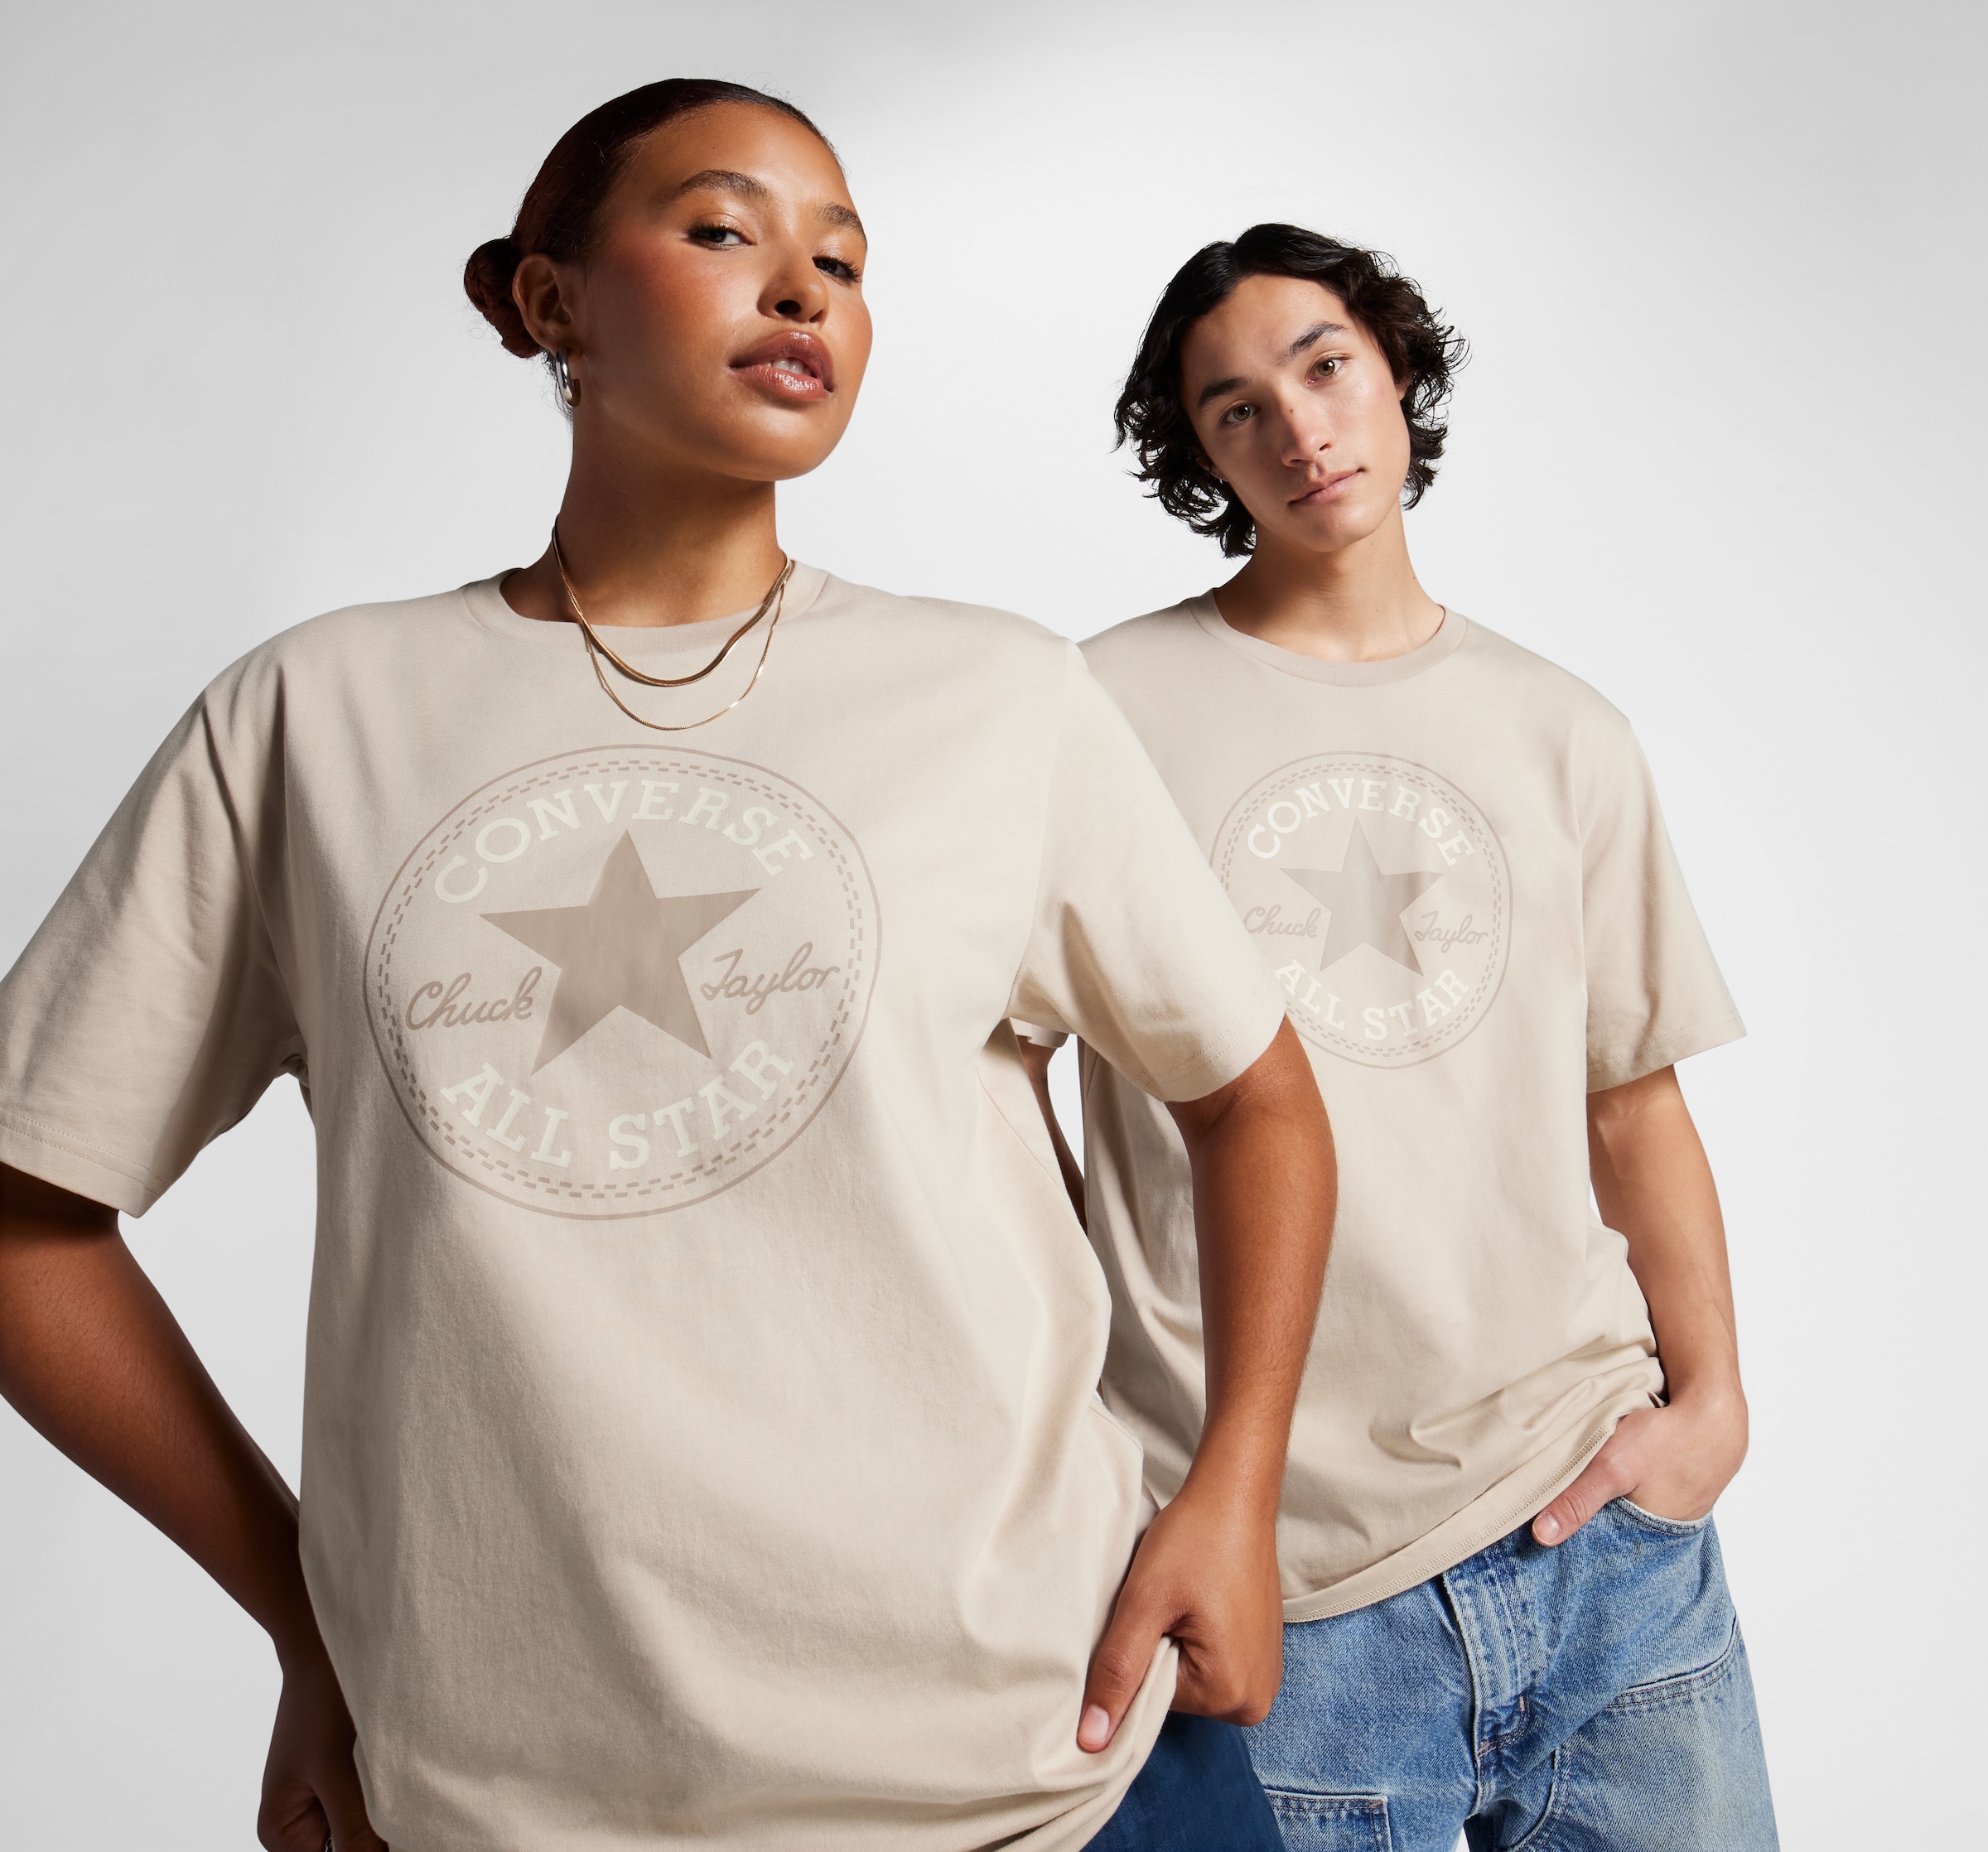 Converse T-Shirt »CONVERSE GO-TO CHUCK TAYLOR CLASSIC PATCH TEE«, (1 tlg.), Unisex